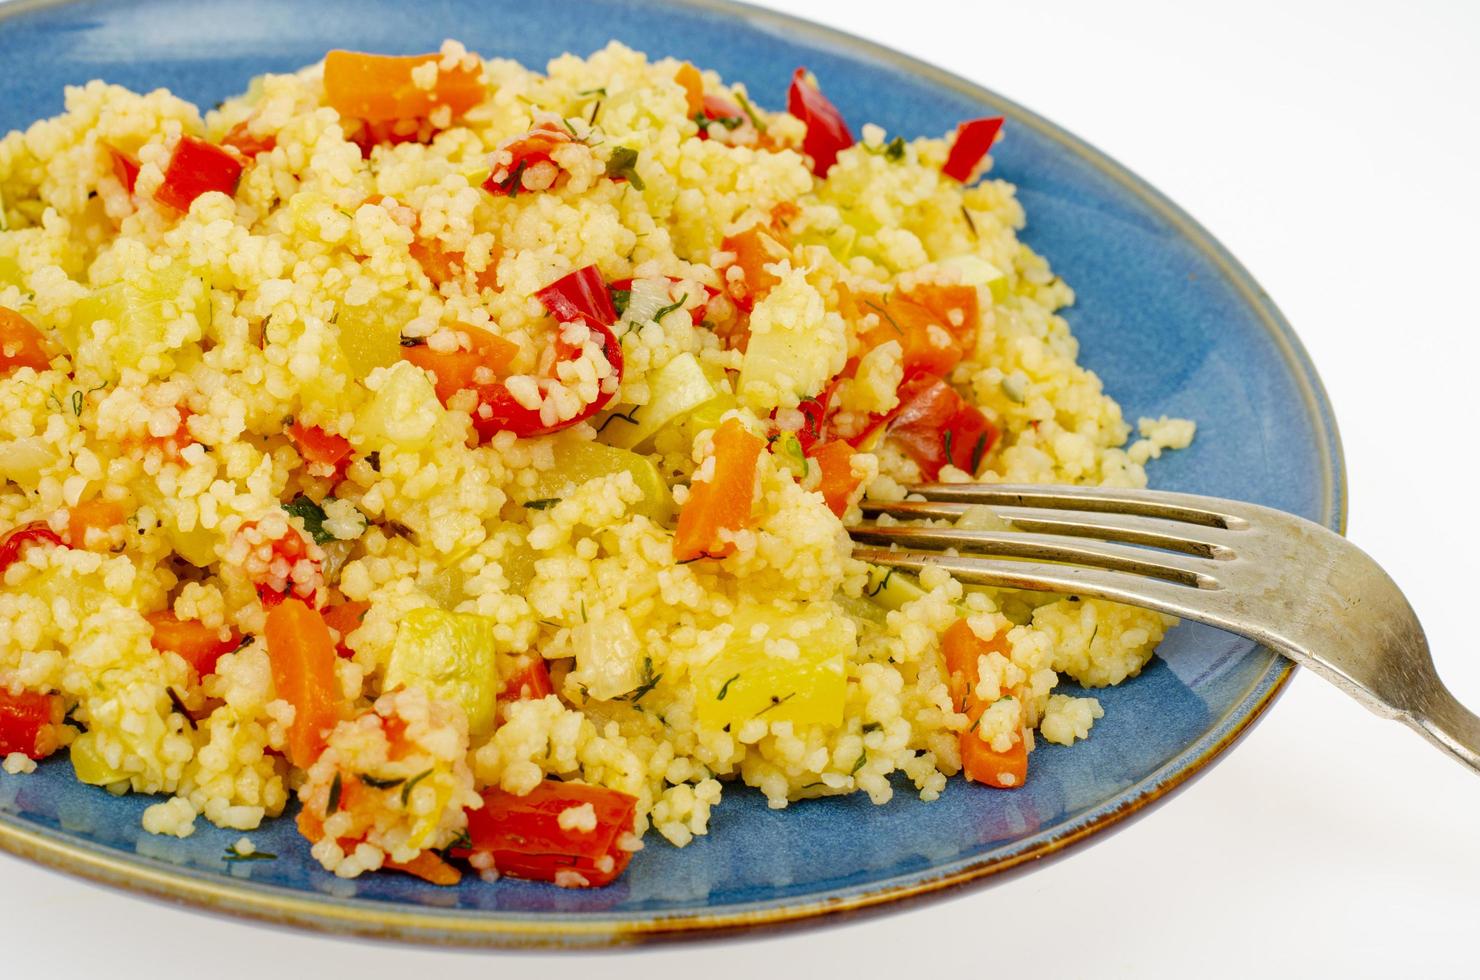 Vegetarian couscous pilaf with vegetables on blue plate. Studio Photo